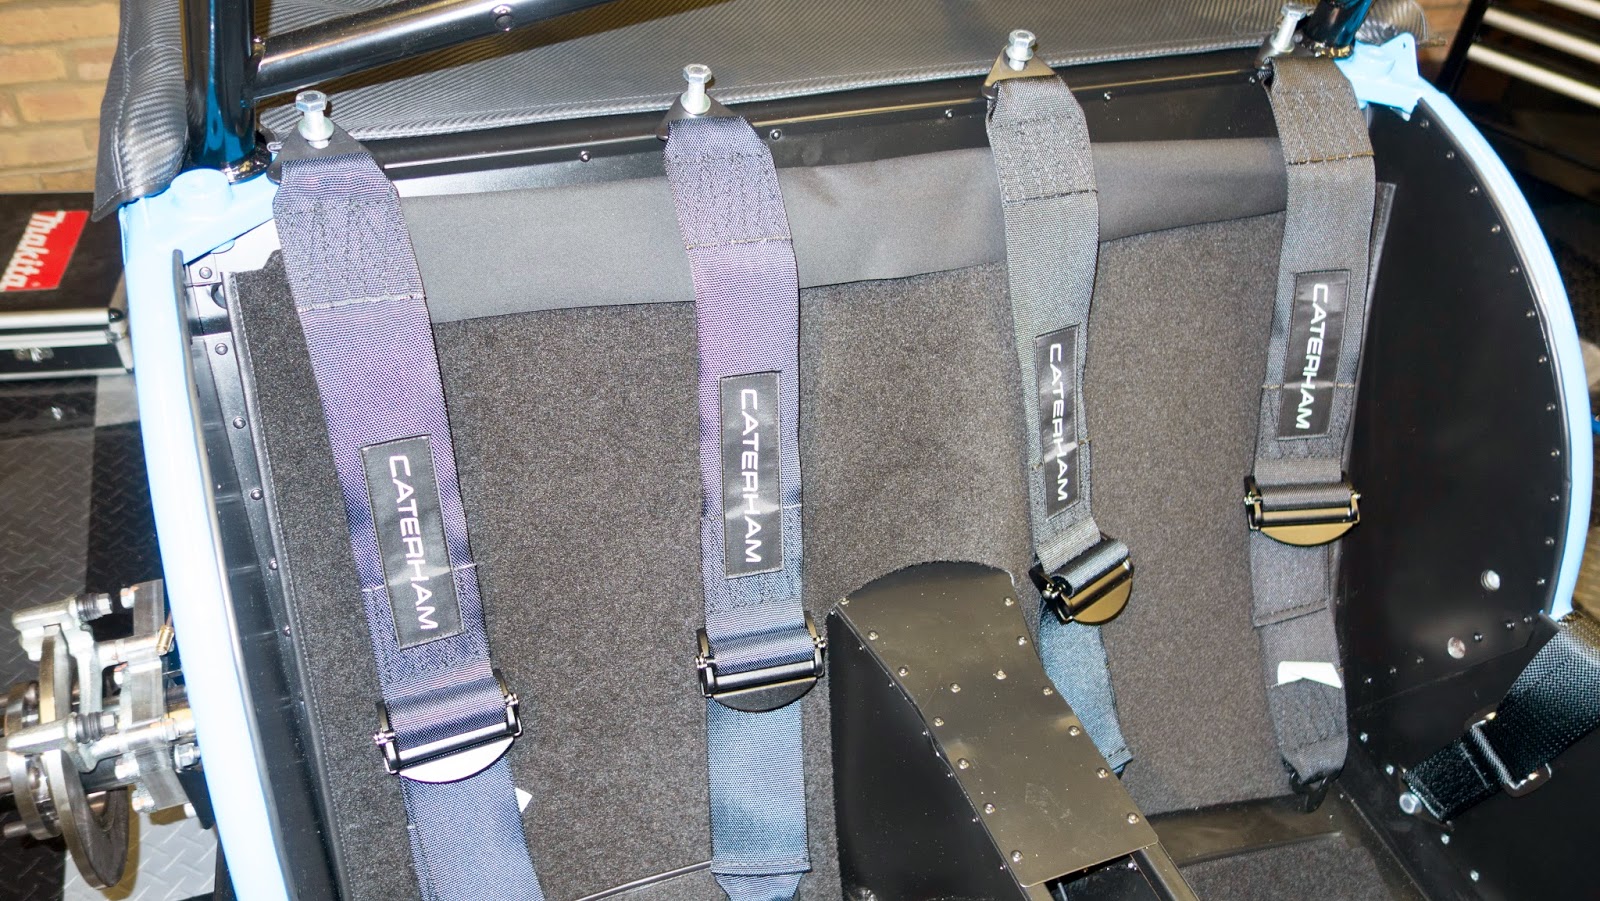 Harness straps are of varying colours